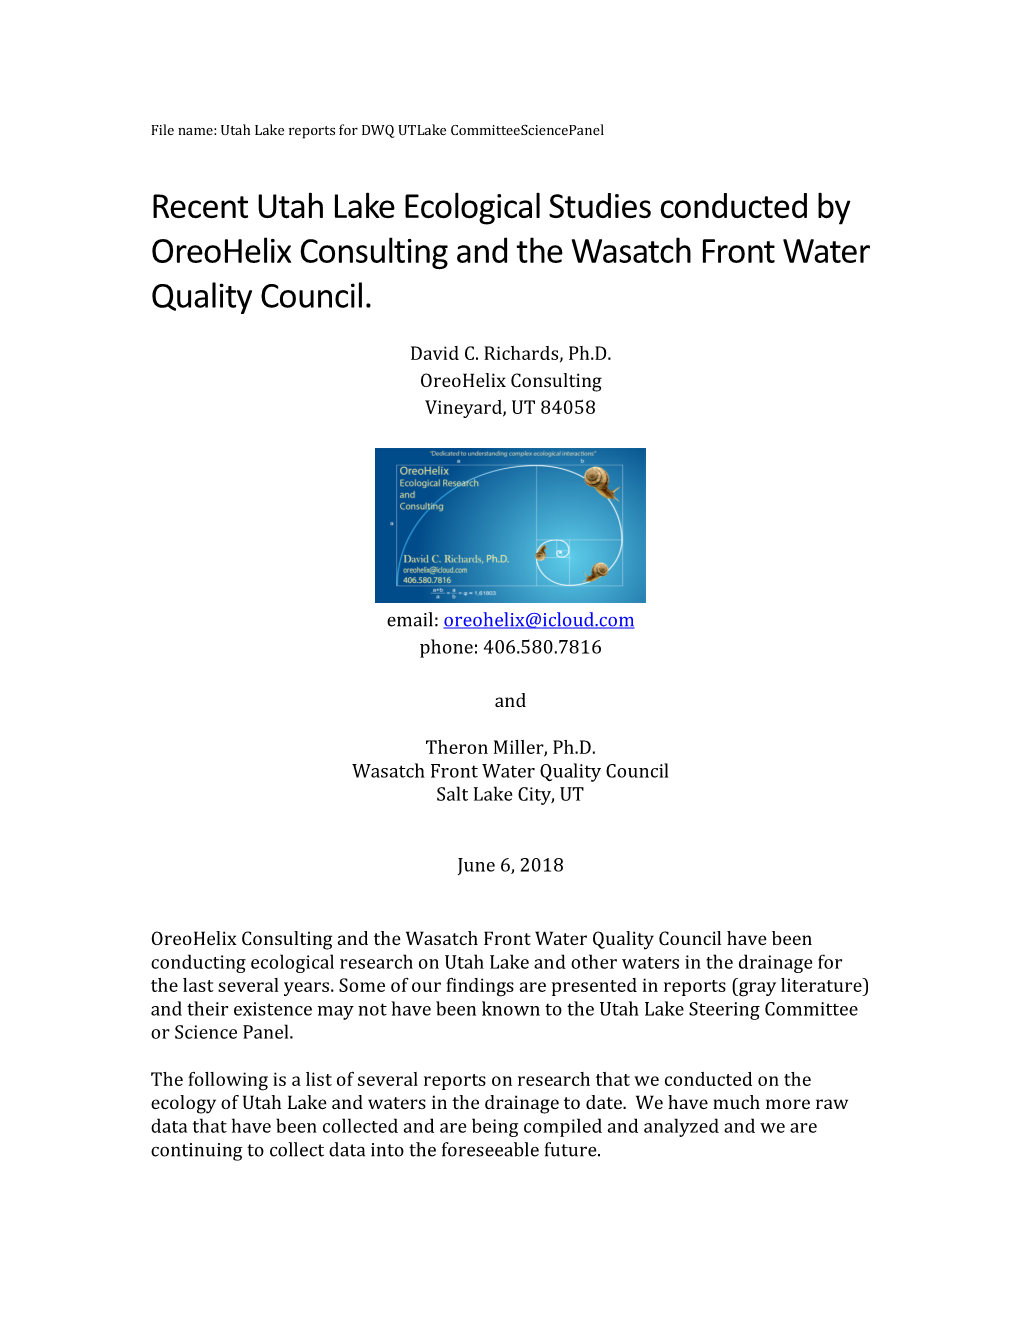 Recent Utah Lake Ecological Studies Conducted by Oreohelix Consulting and the Wasatch Front Water Quality Council